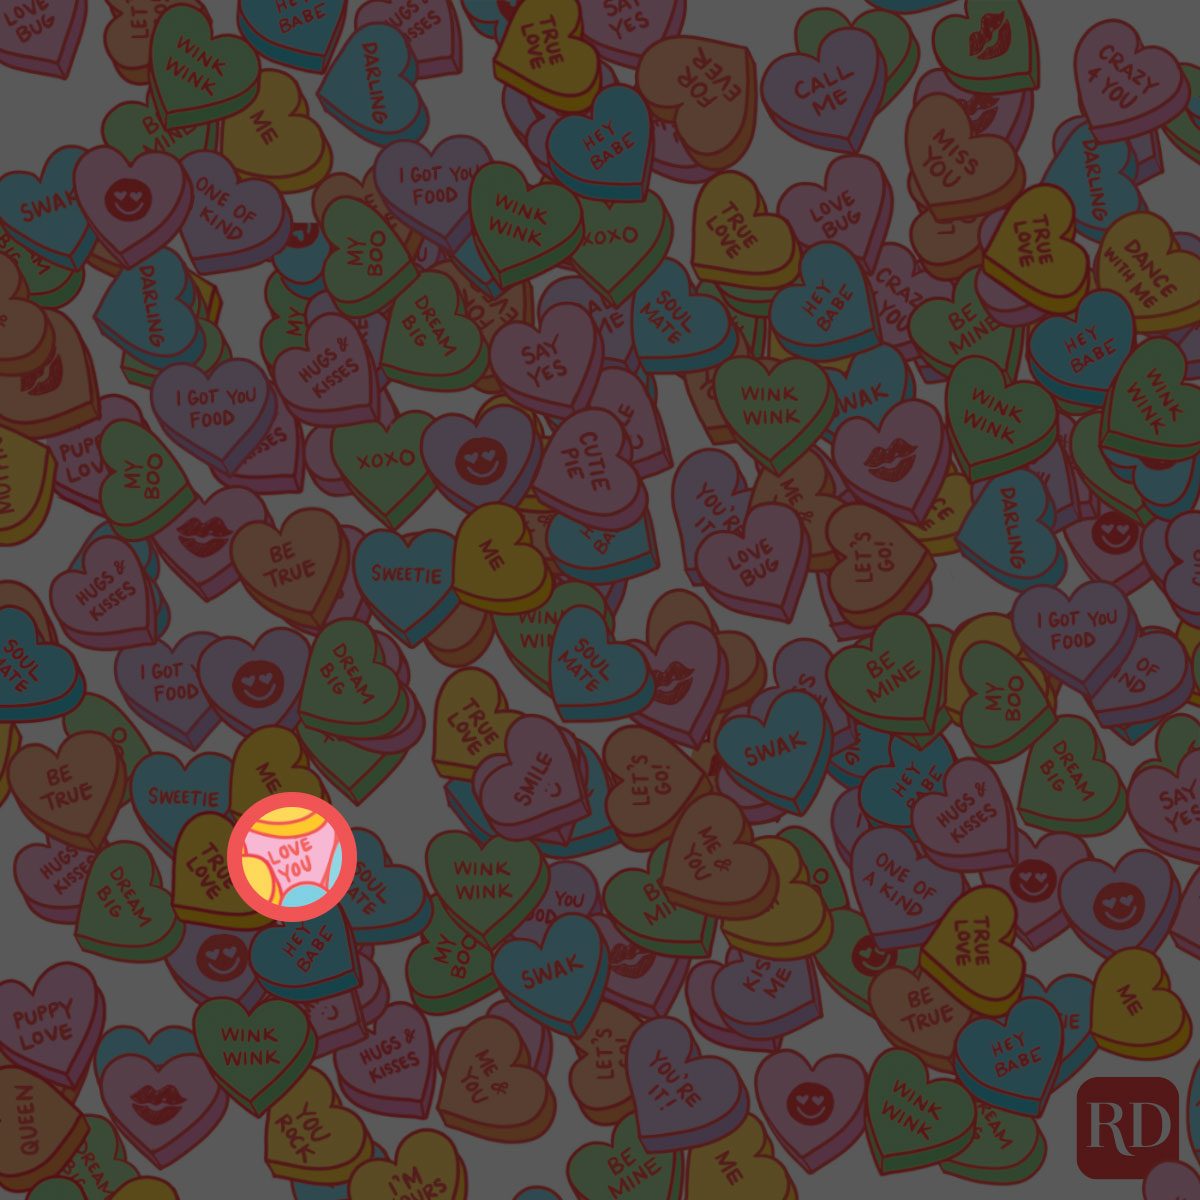 Find The "Love You" In The Valentines Heart Candy Puzzle Answer